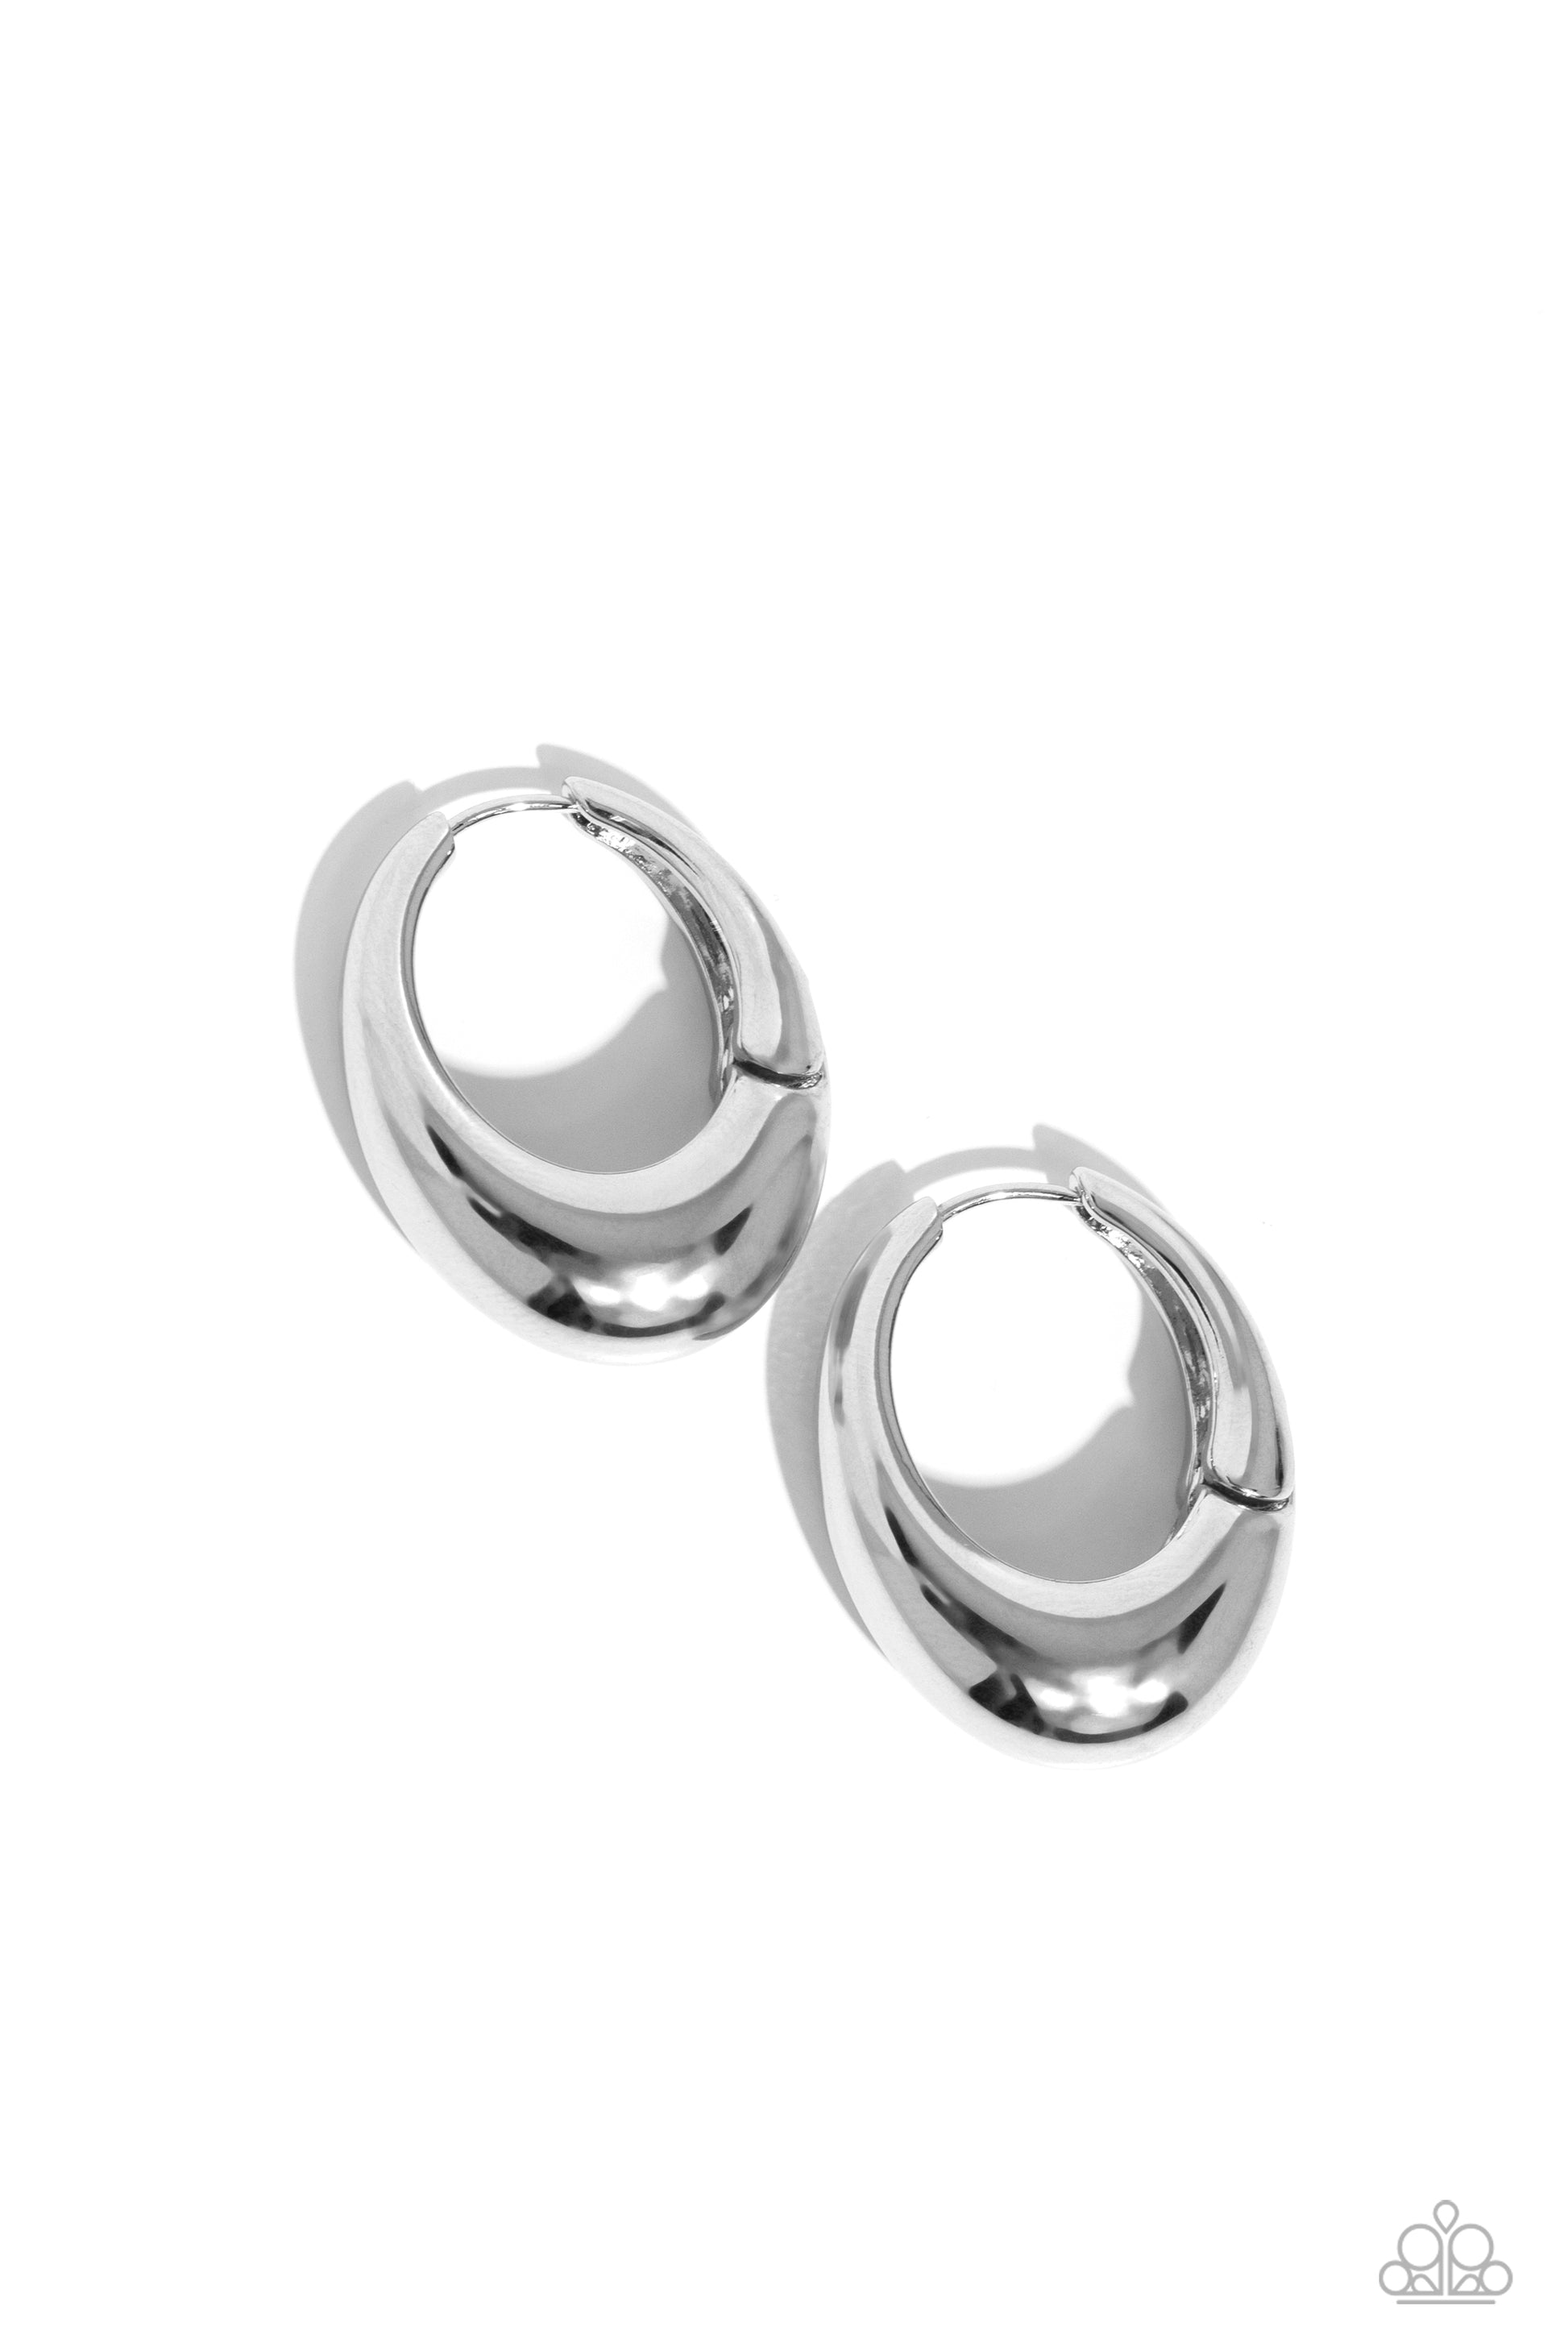 <p>Paparazzi Accessories - Oval Official - Silver Hoop Earrings featuring a thick surface, an elongated silver hoop curls around the ear for a sleek basic look. Earring attaches to a standard hinge closure fitting. Hoop measures approximately 3/4" in diameter.</p> <p><i>Sold as one pair of hinge hoop earrings.</i></p>